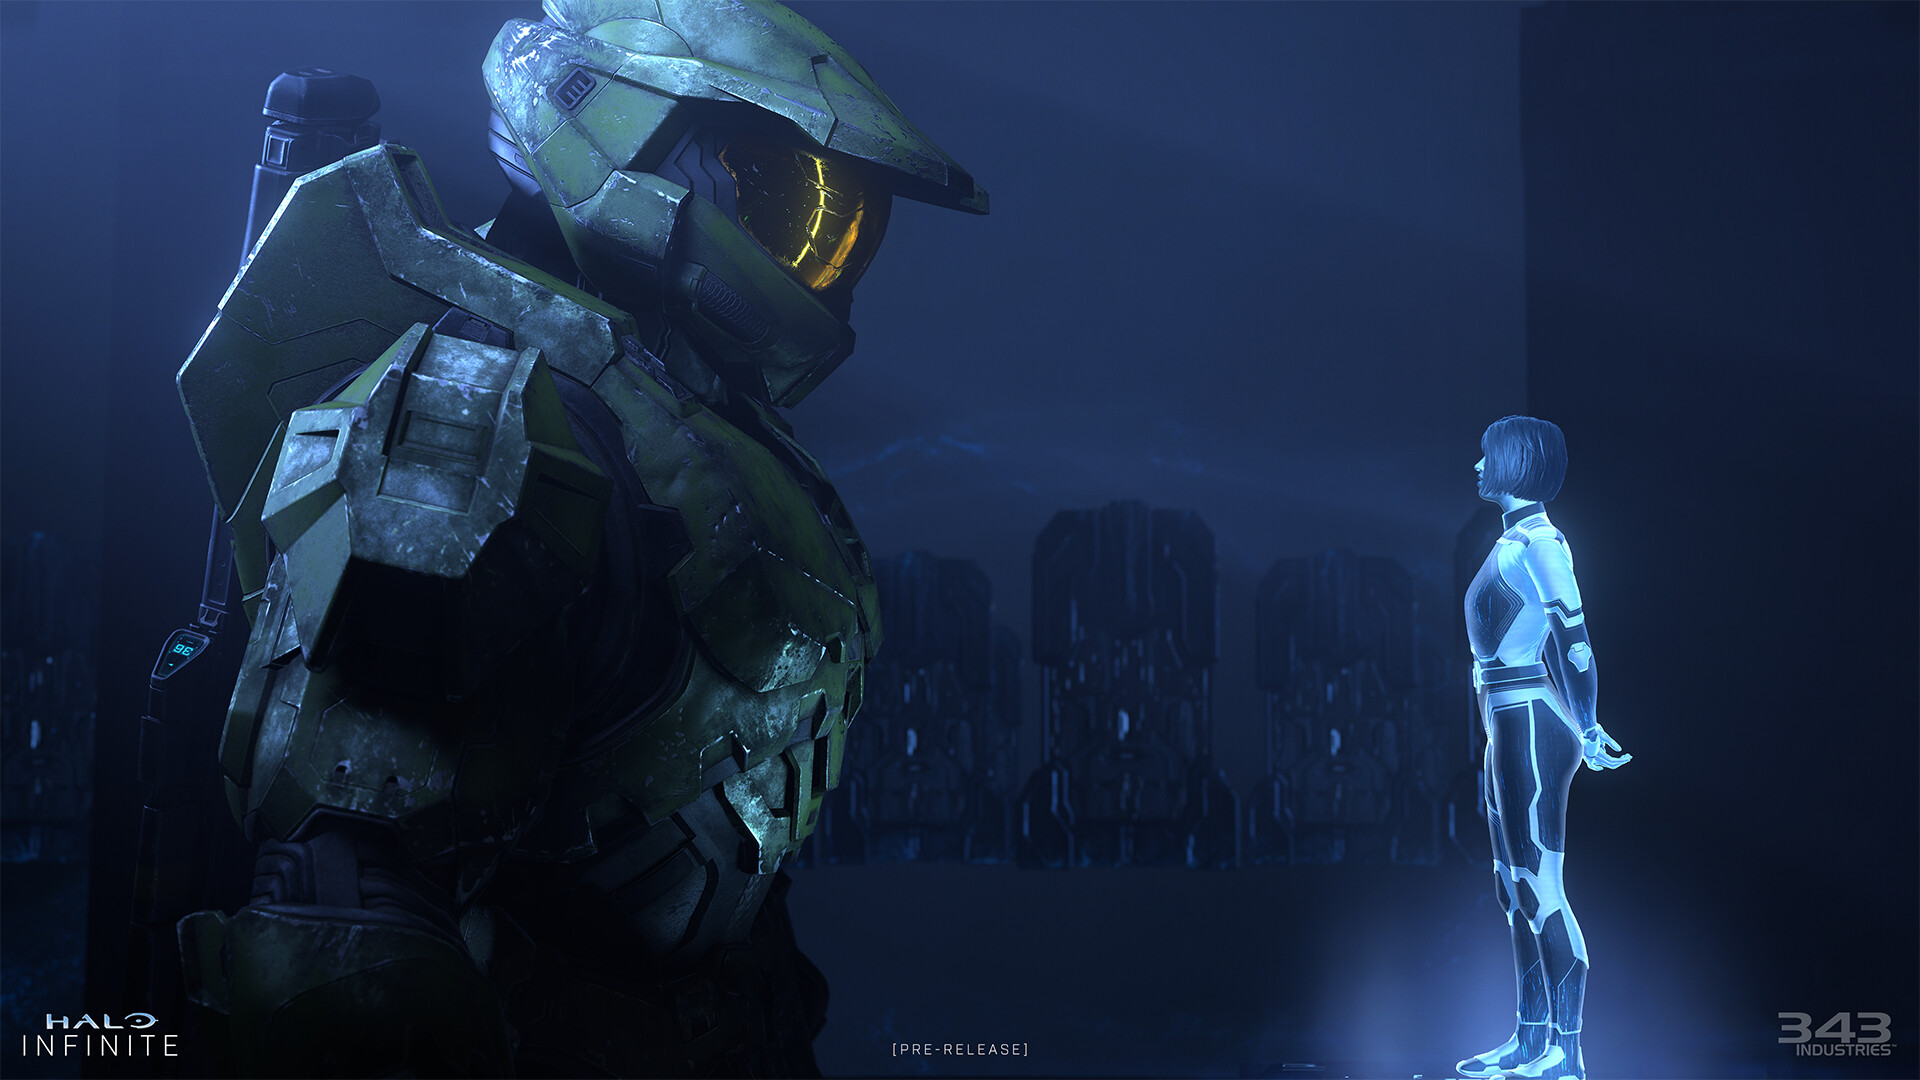 Halo Infinite will have changes to the progression system with the release of Season 4